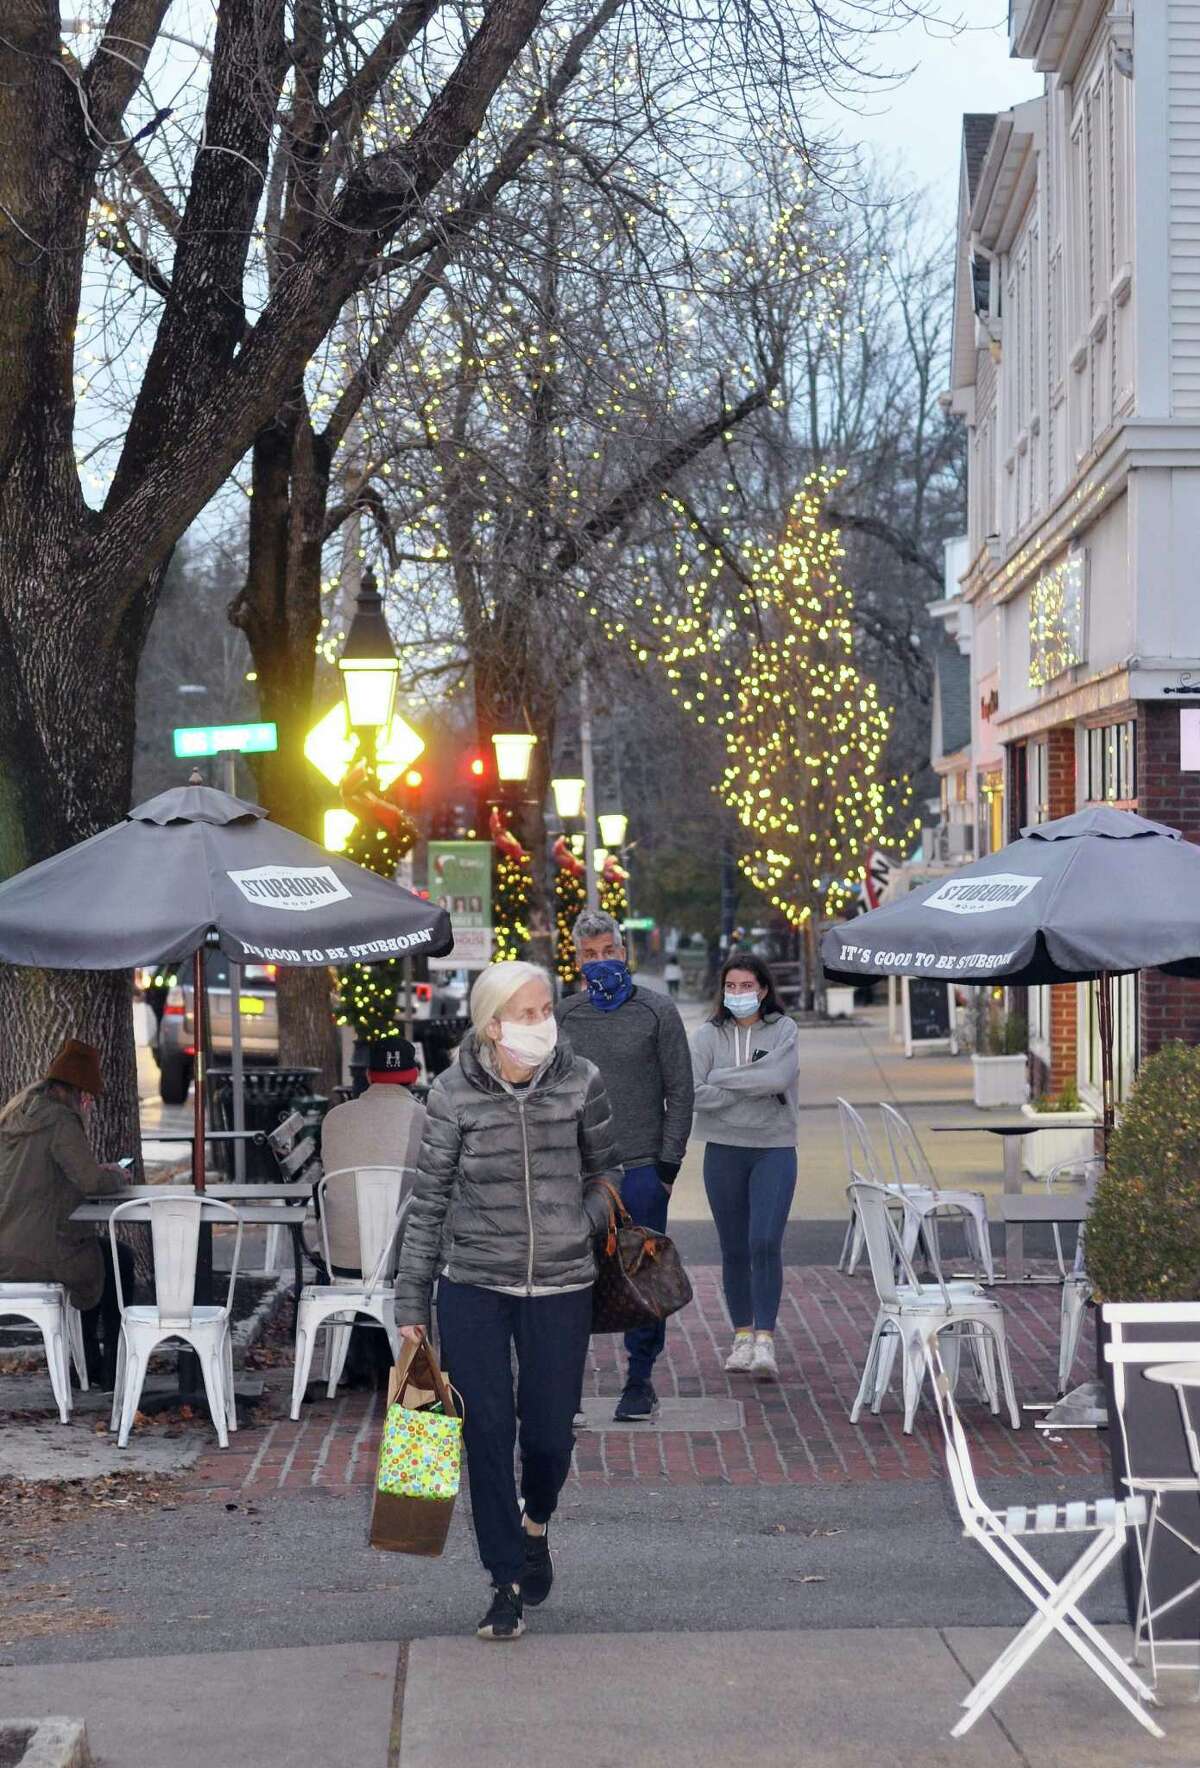 The downtown lights in Ridgefield are on and shoppers are out, but a virtual ceremony to officially turn on the lights is planned Friday, Nov. 27, at 5:45 p.m., available on a variety of electronic media.